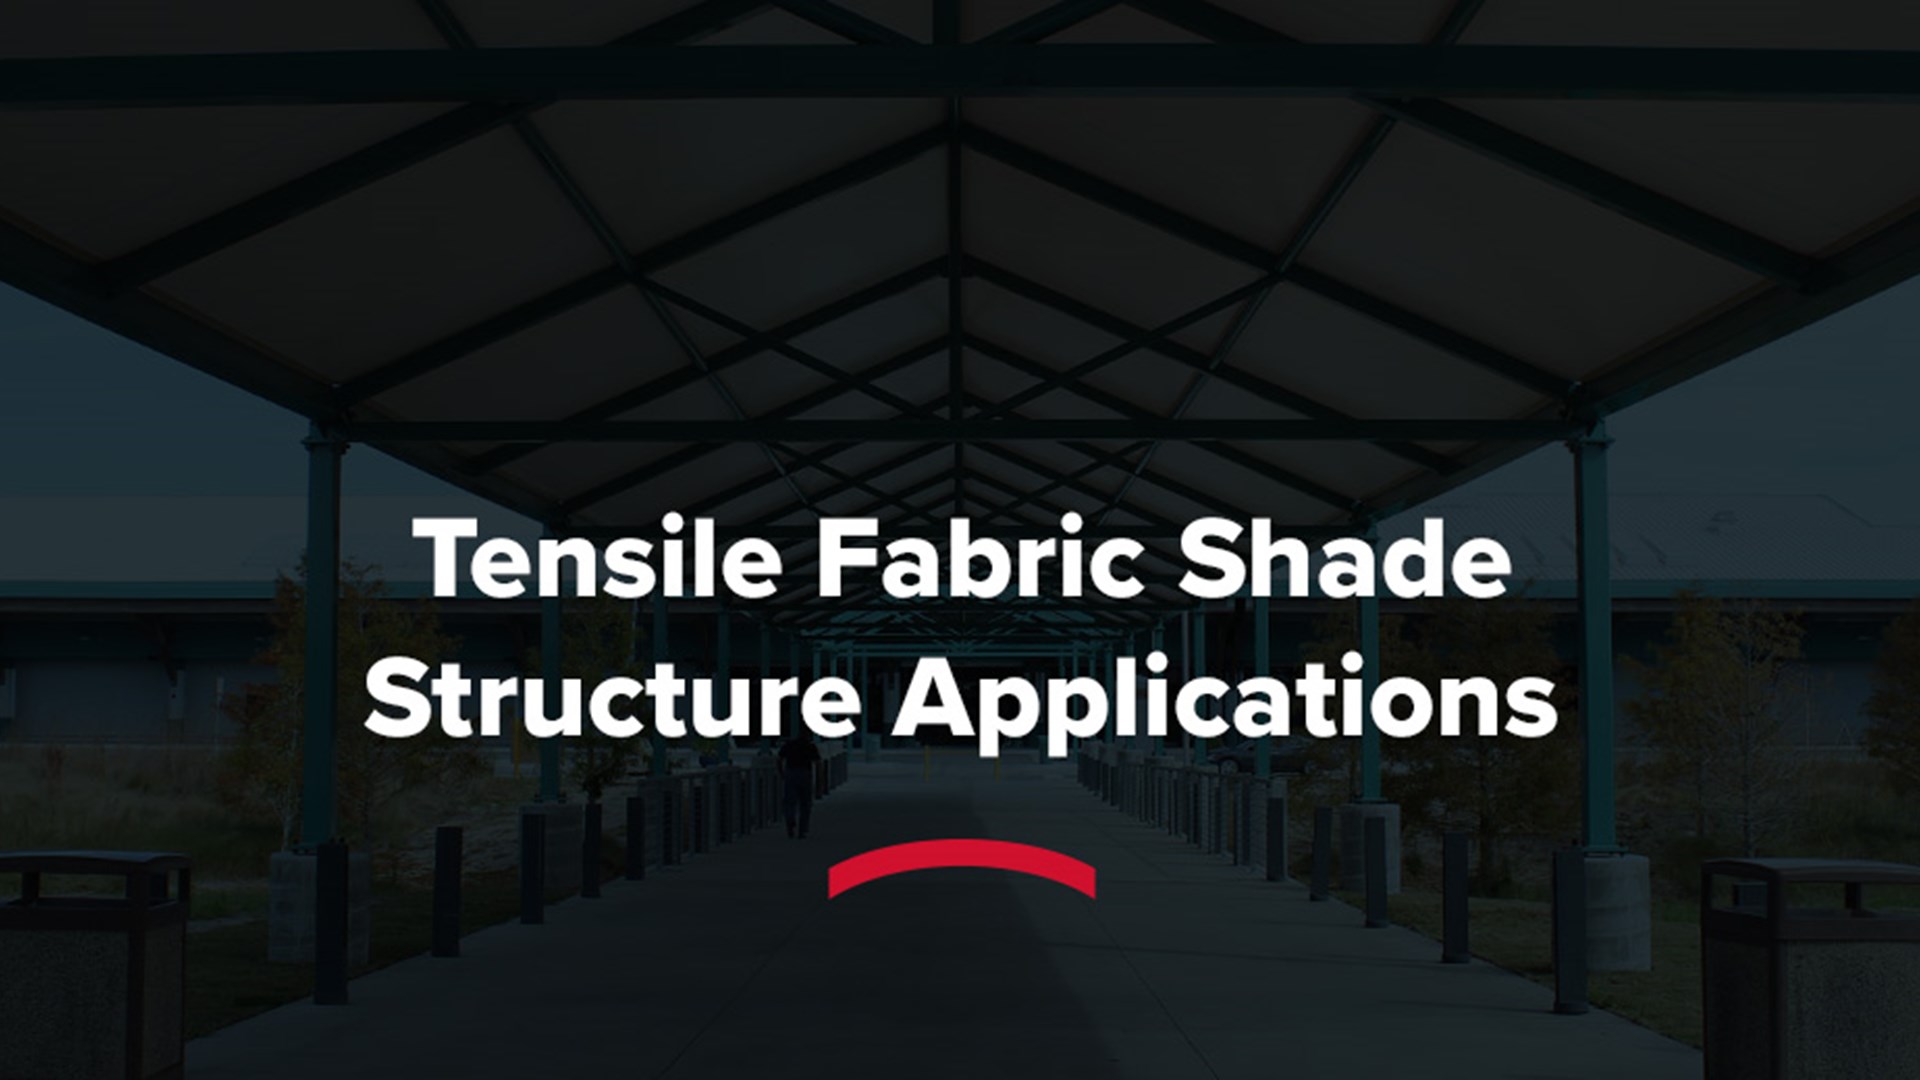 Tensile Fabric Shade Structure Applications